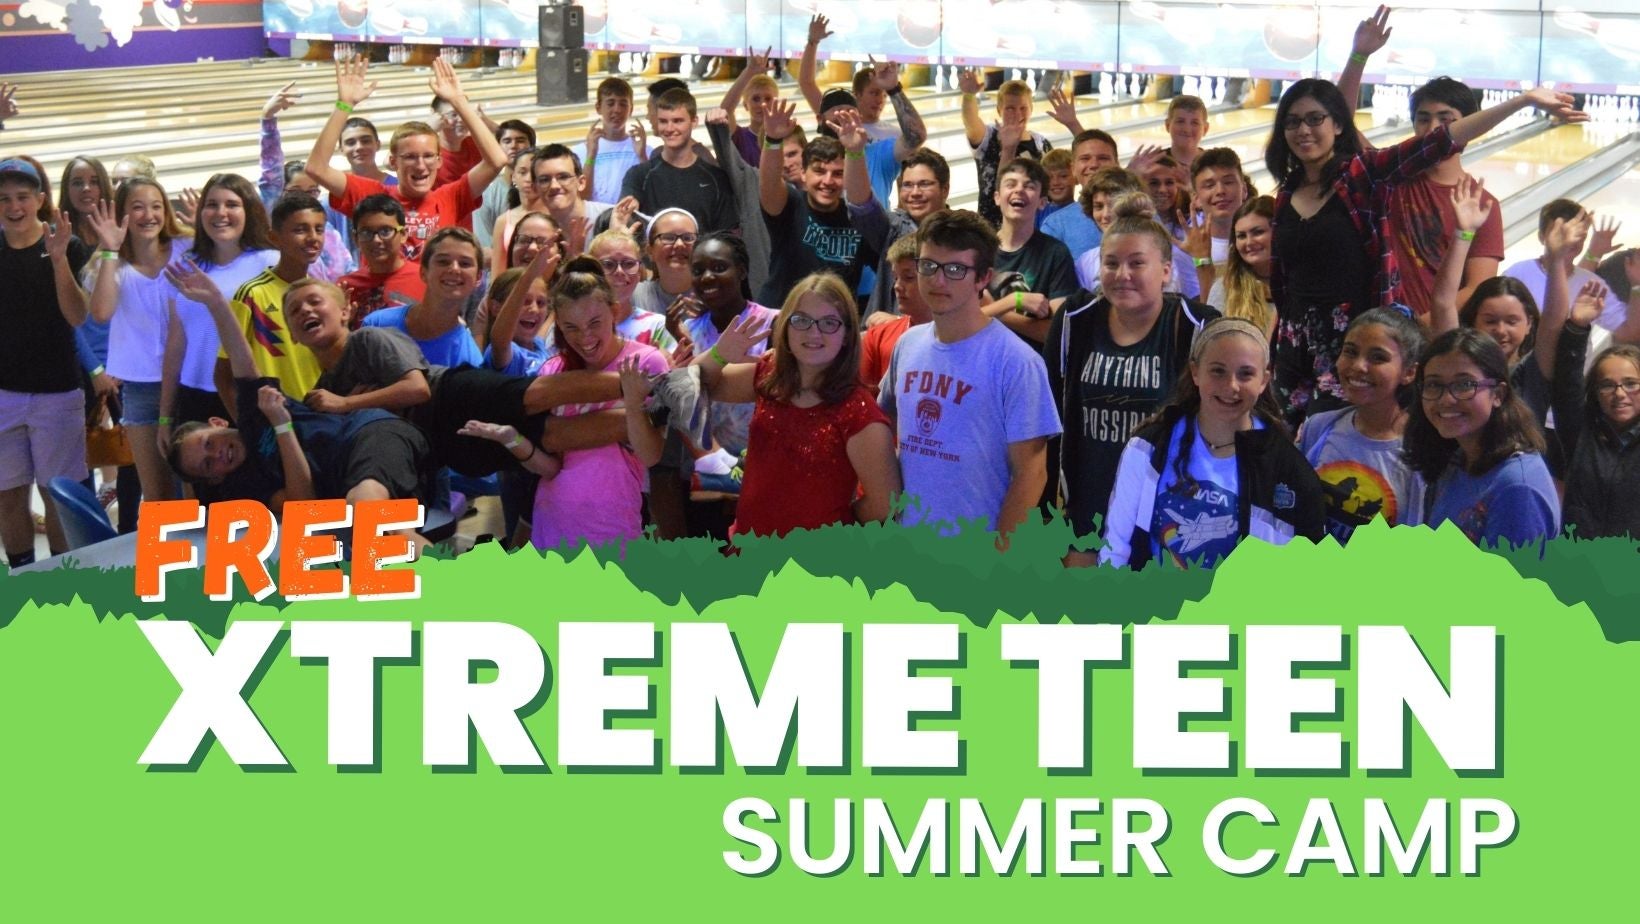 Image of a group of teenagers at the bowling ally with text that reads "free xtreme teen summer camp"